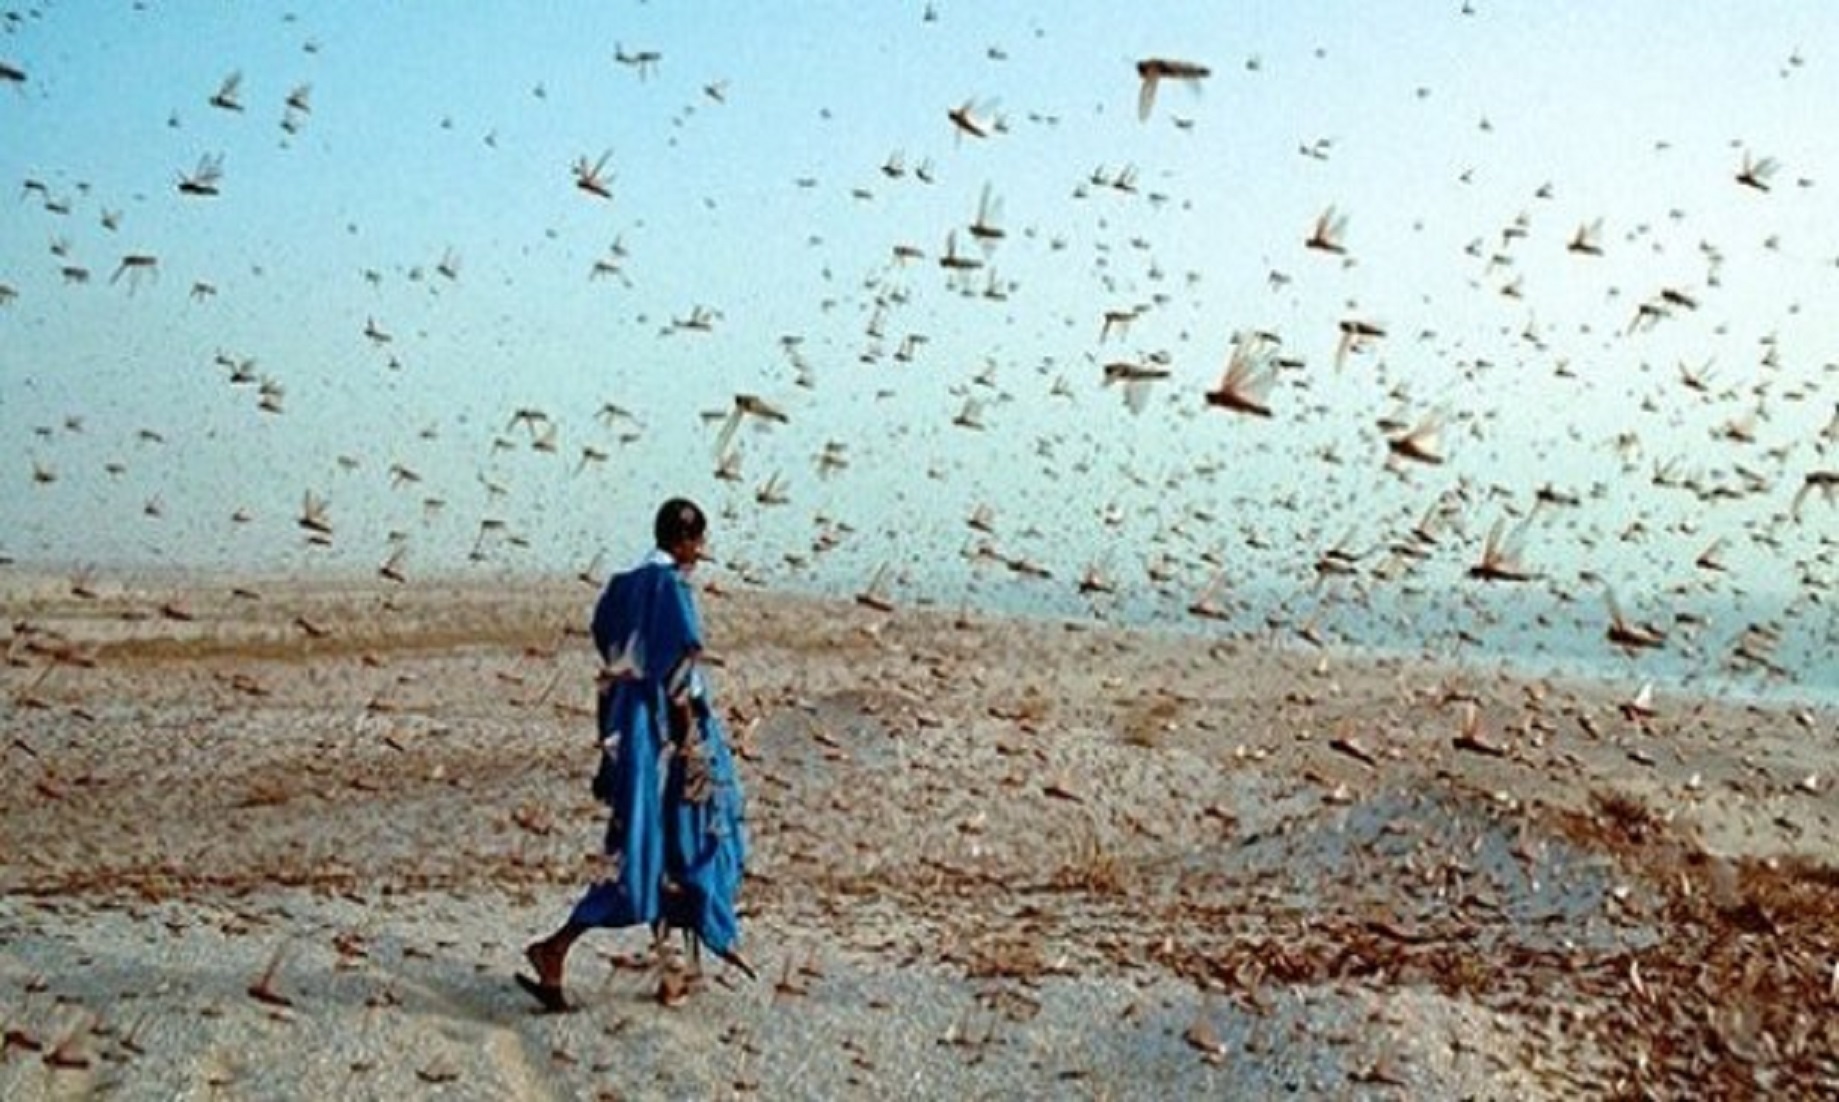 UN Chief Calls For Intensified Efforts To Deal With Locust Outbreak